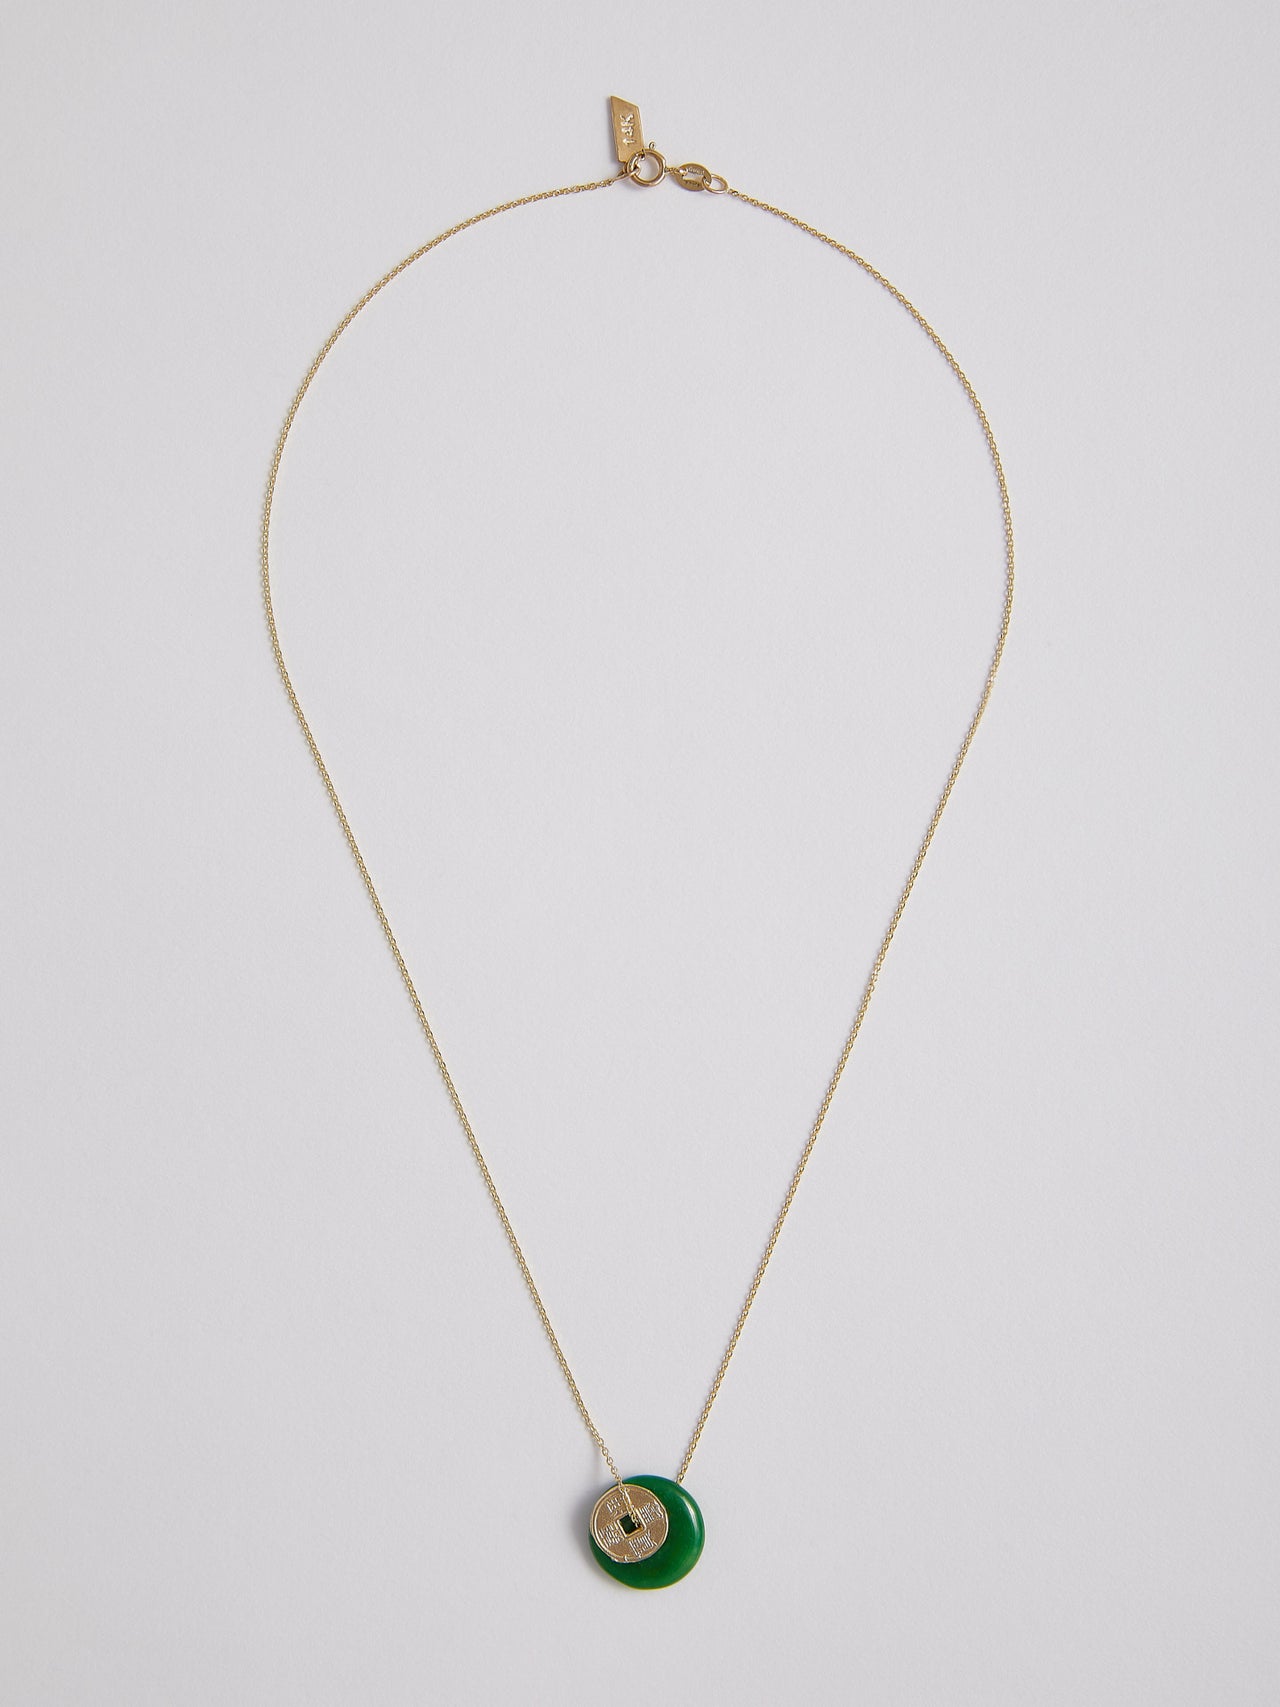 14Kt Yellow Gold Chain Necklace with Jade and Gold Coin Pendants